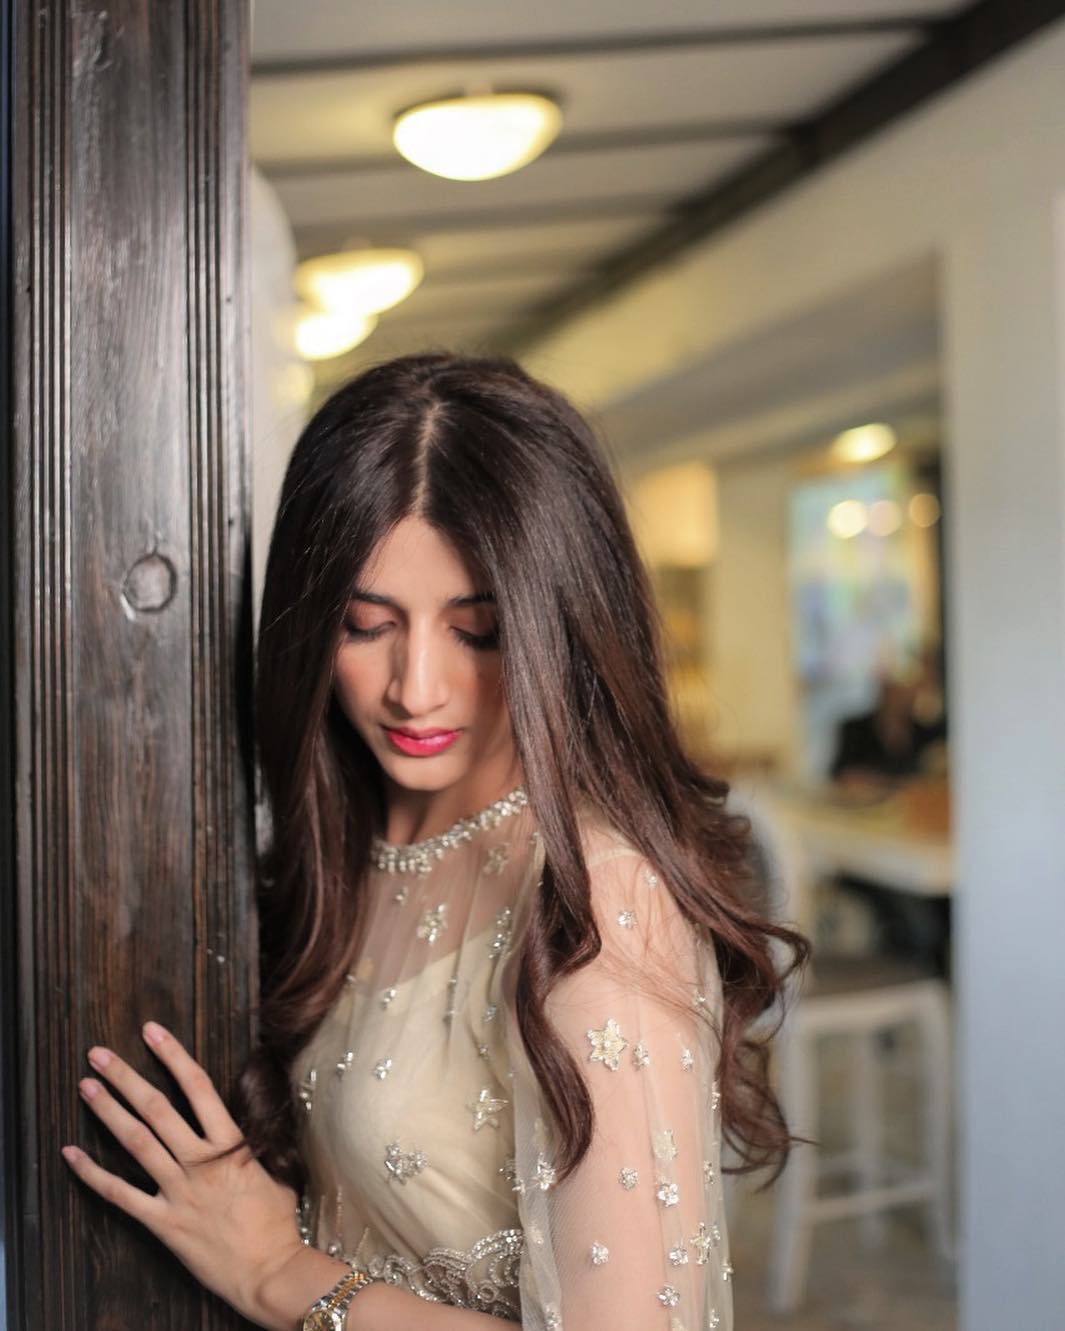 Click To Enlarge Image - Mawra Hocane , HD Wallpaper & Backgrounds